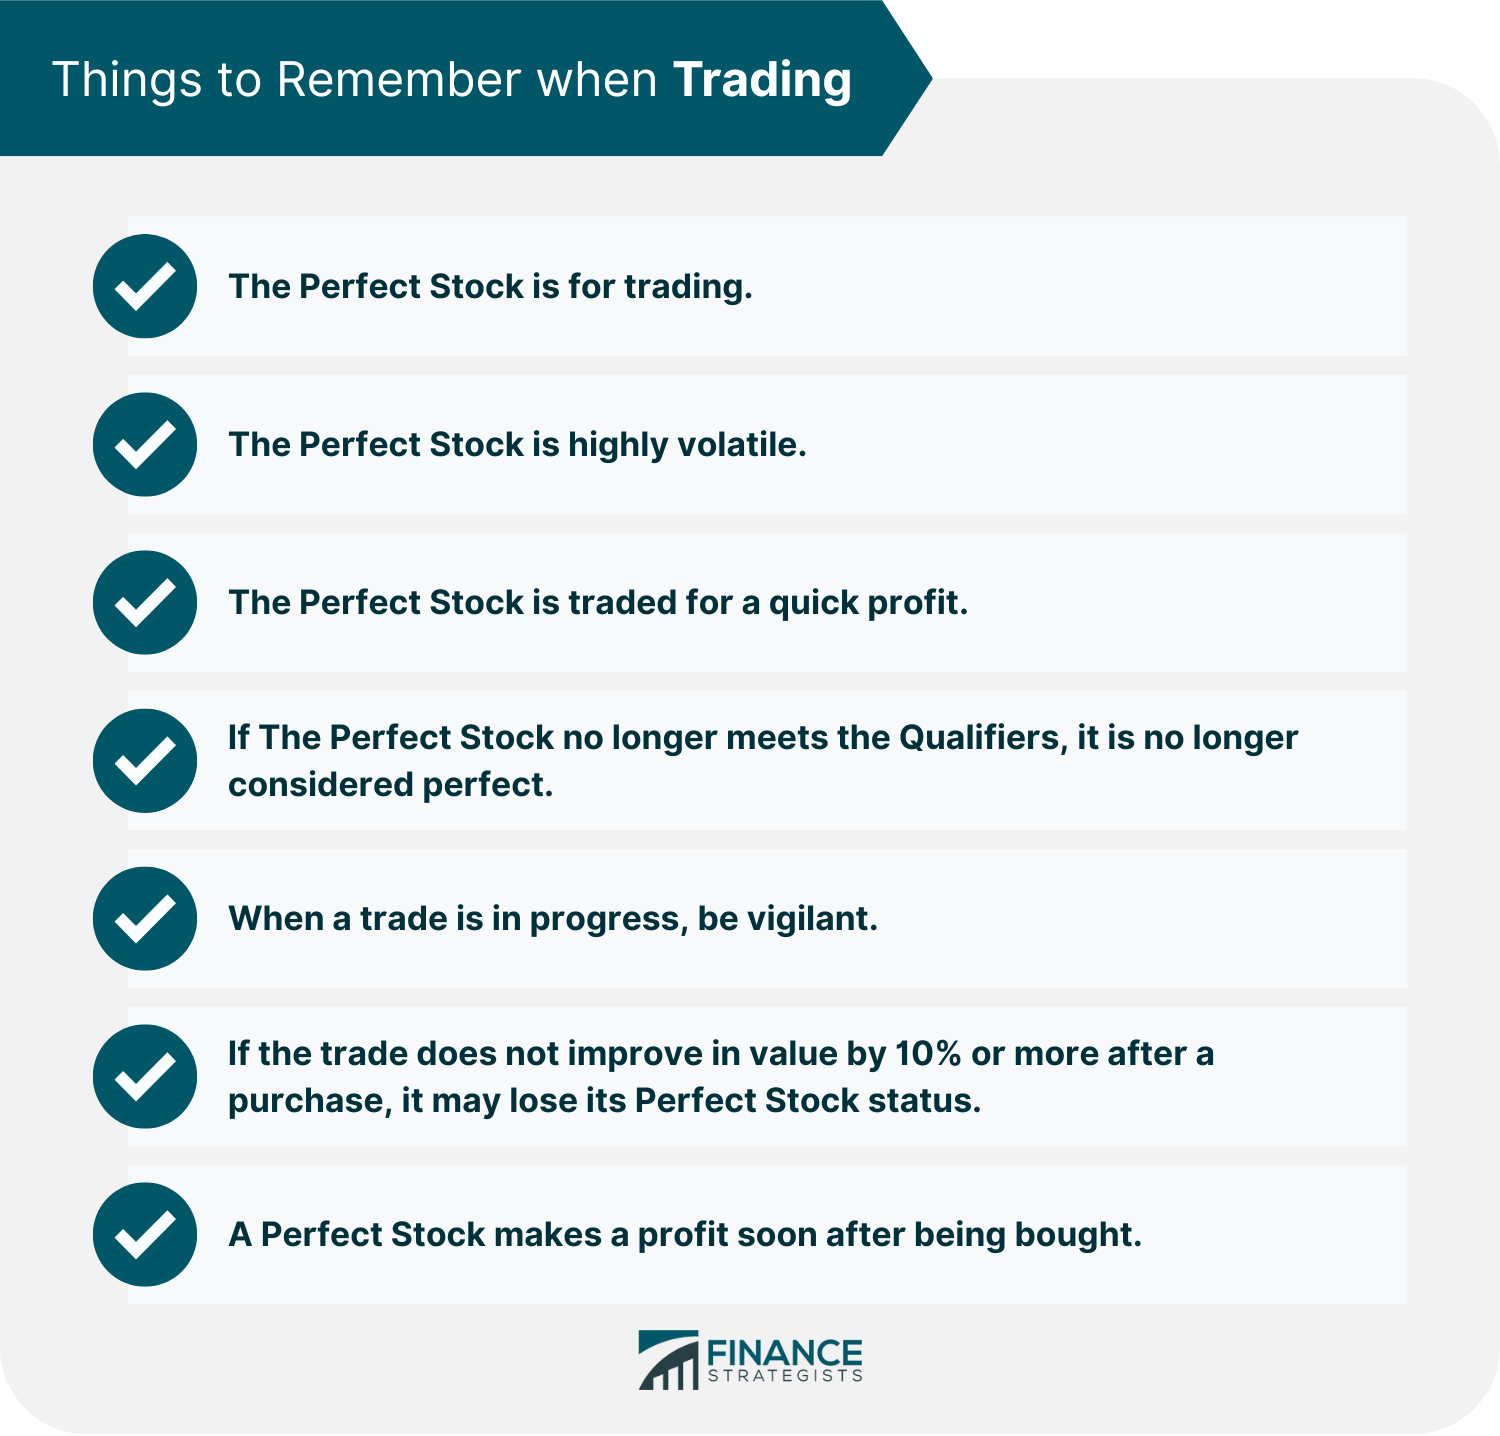 Things to Remember when Trading